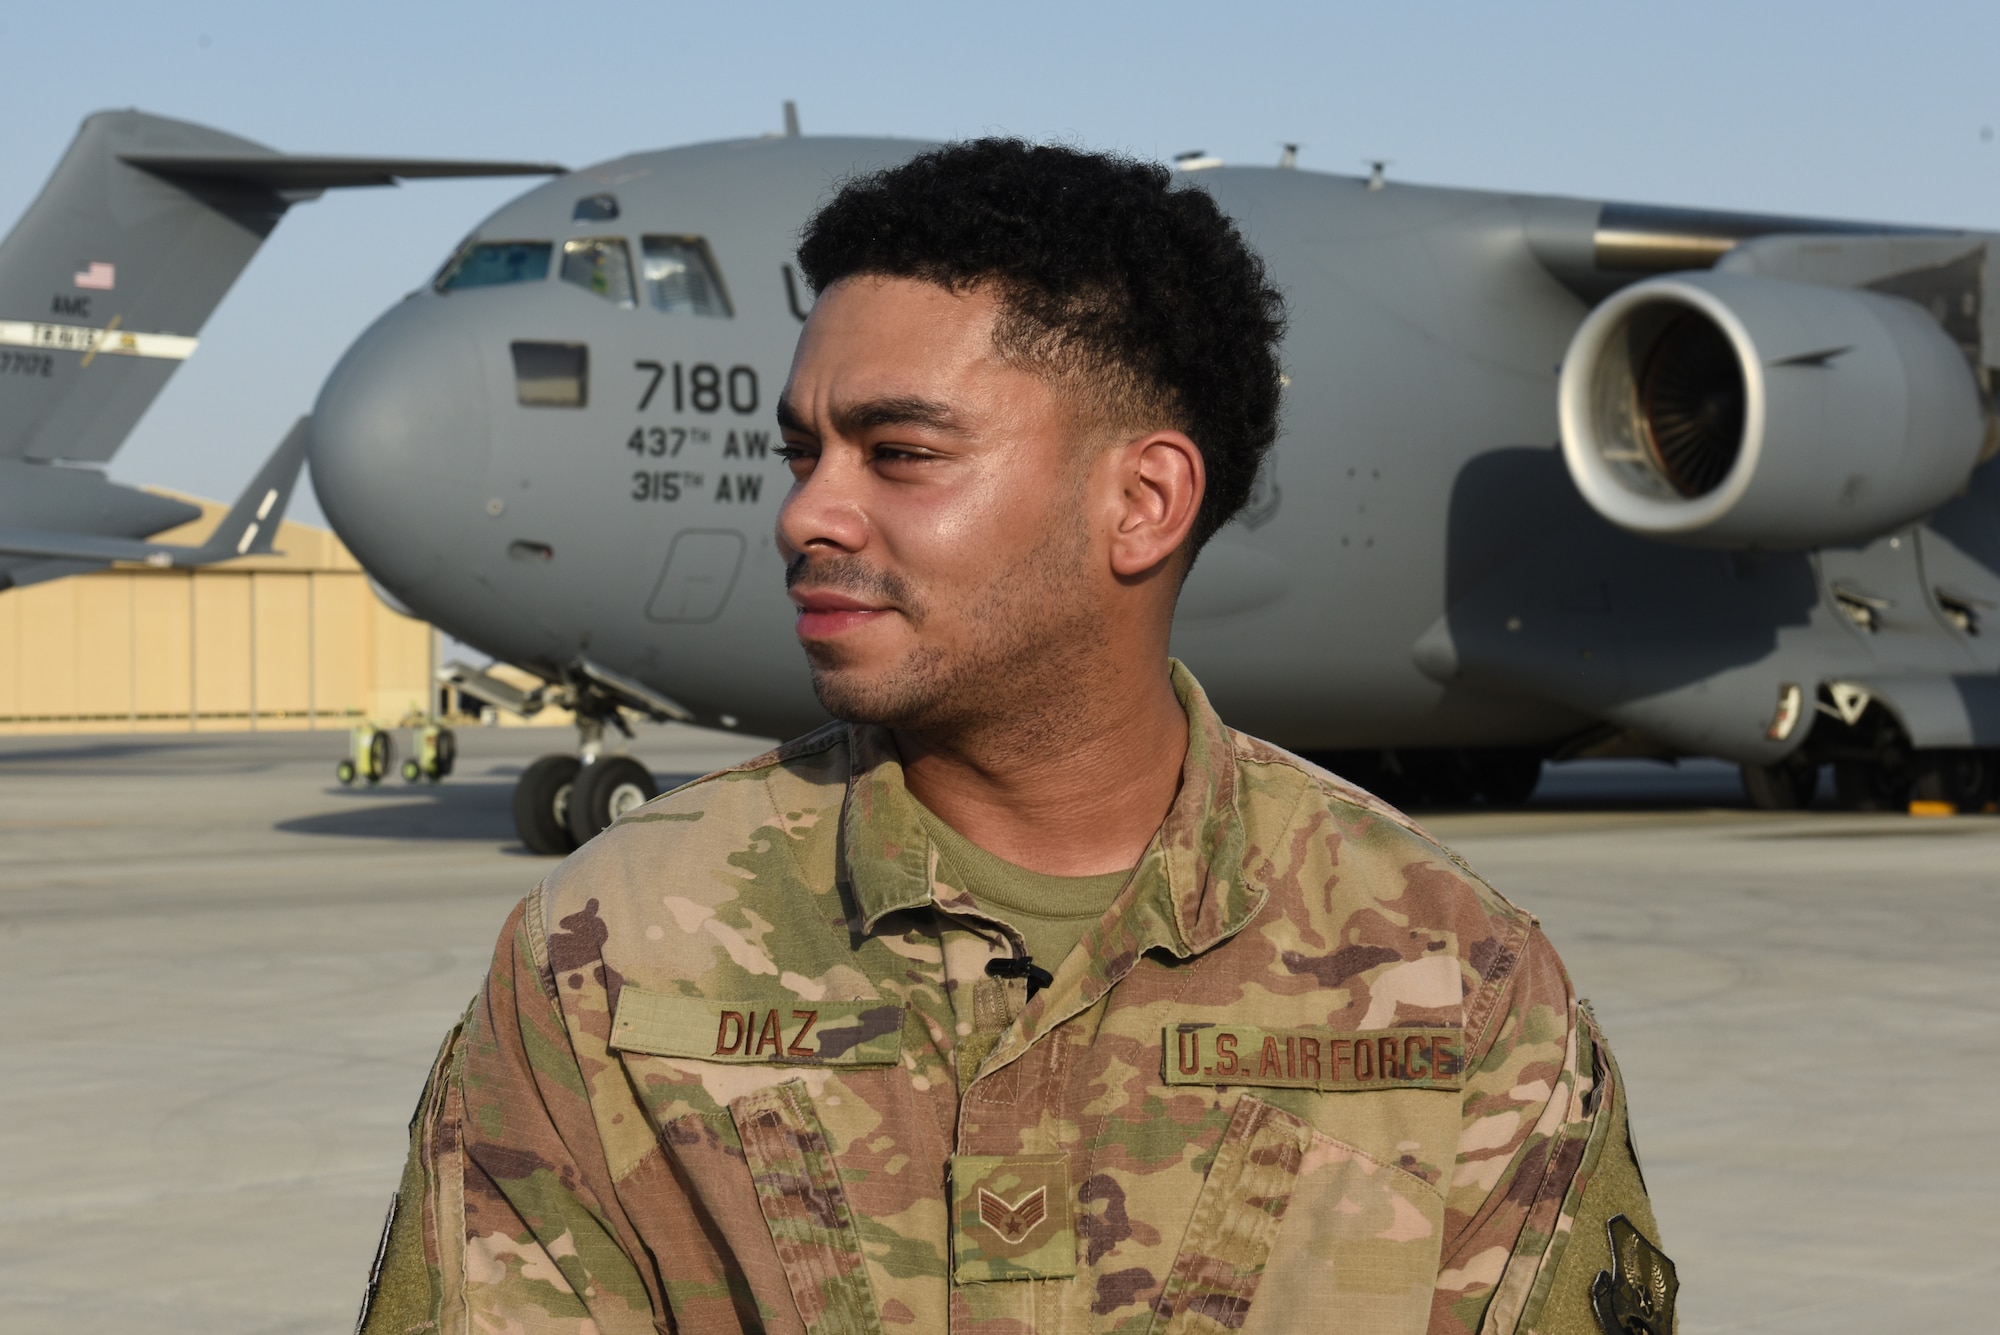 Senior Airman Justin Diaz, 816th Expeditionary Airlift Squadron Fly Away Security Team member, stands on the flight line at Al Udeid Air Base, Qatar, June 4, 2020. FAST members are trained Security Forces Airmen who work alongside U.S. Air Force Phoenix Ravens to secure flight lines in the U.S. Air Forces Central Command Area of Responsibility and ensure safety of an aircraft and its crew. (U.S. Air Force photo by Senior Airman Shay Stuart)